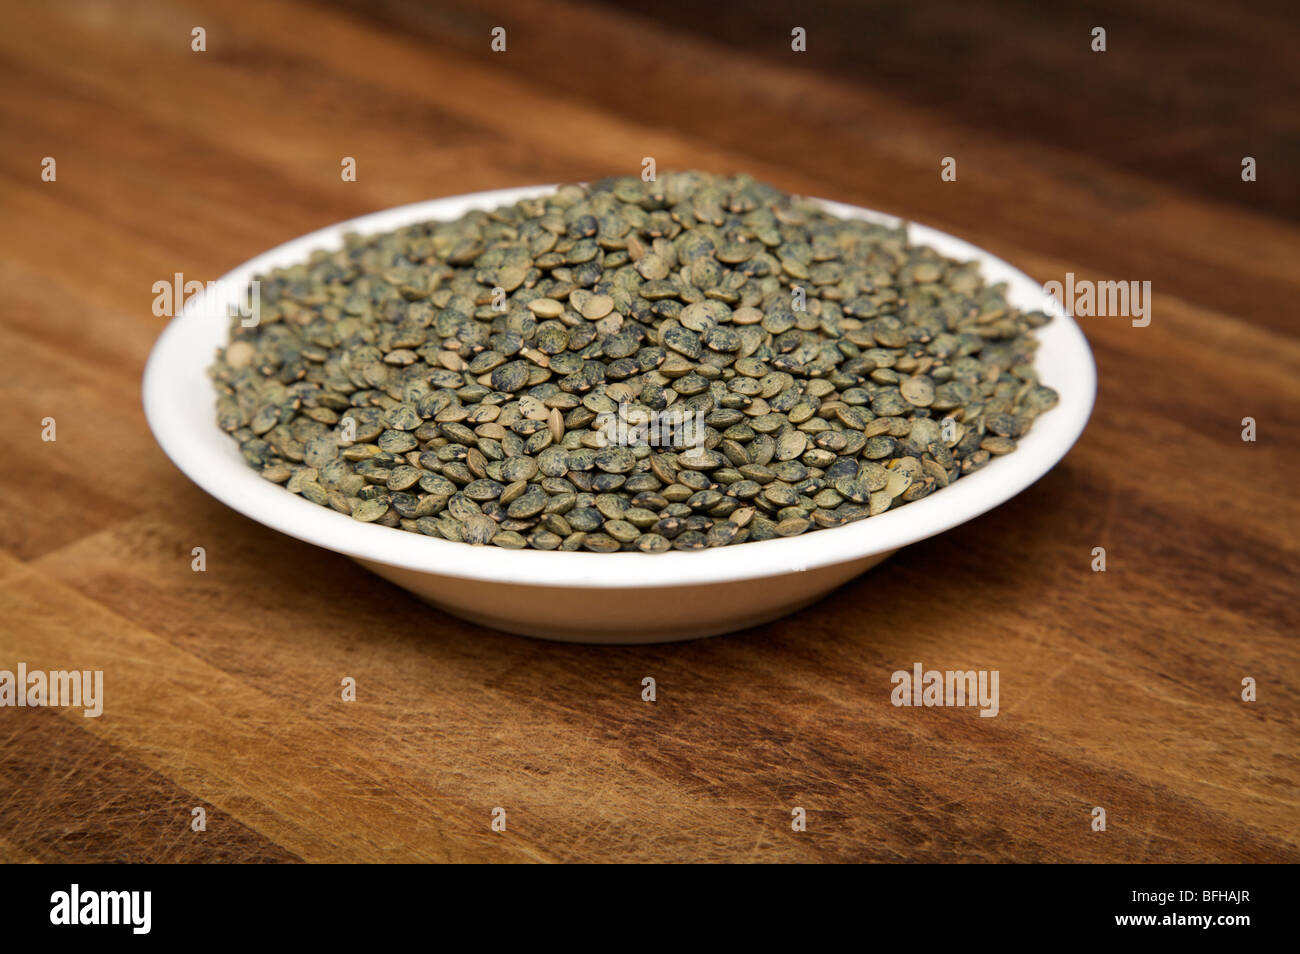 Cooking Ingredient Lentil Seeds in a white bowl on a kitchen work surface. Stock Photo